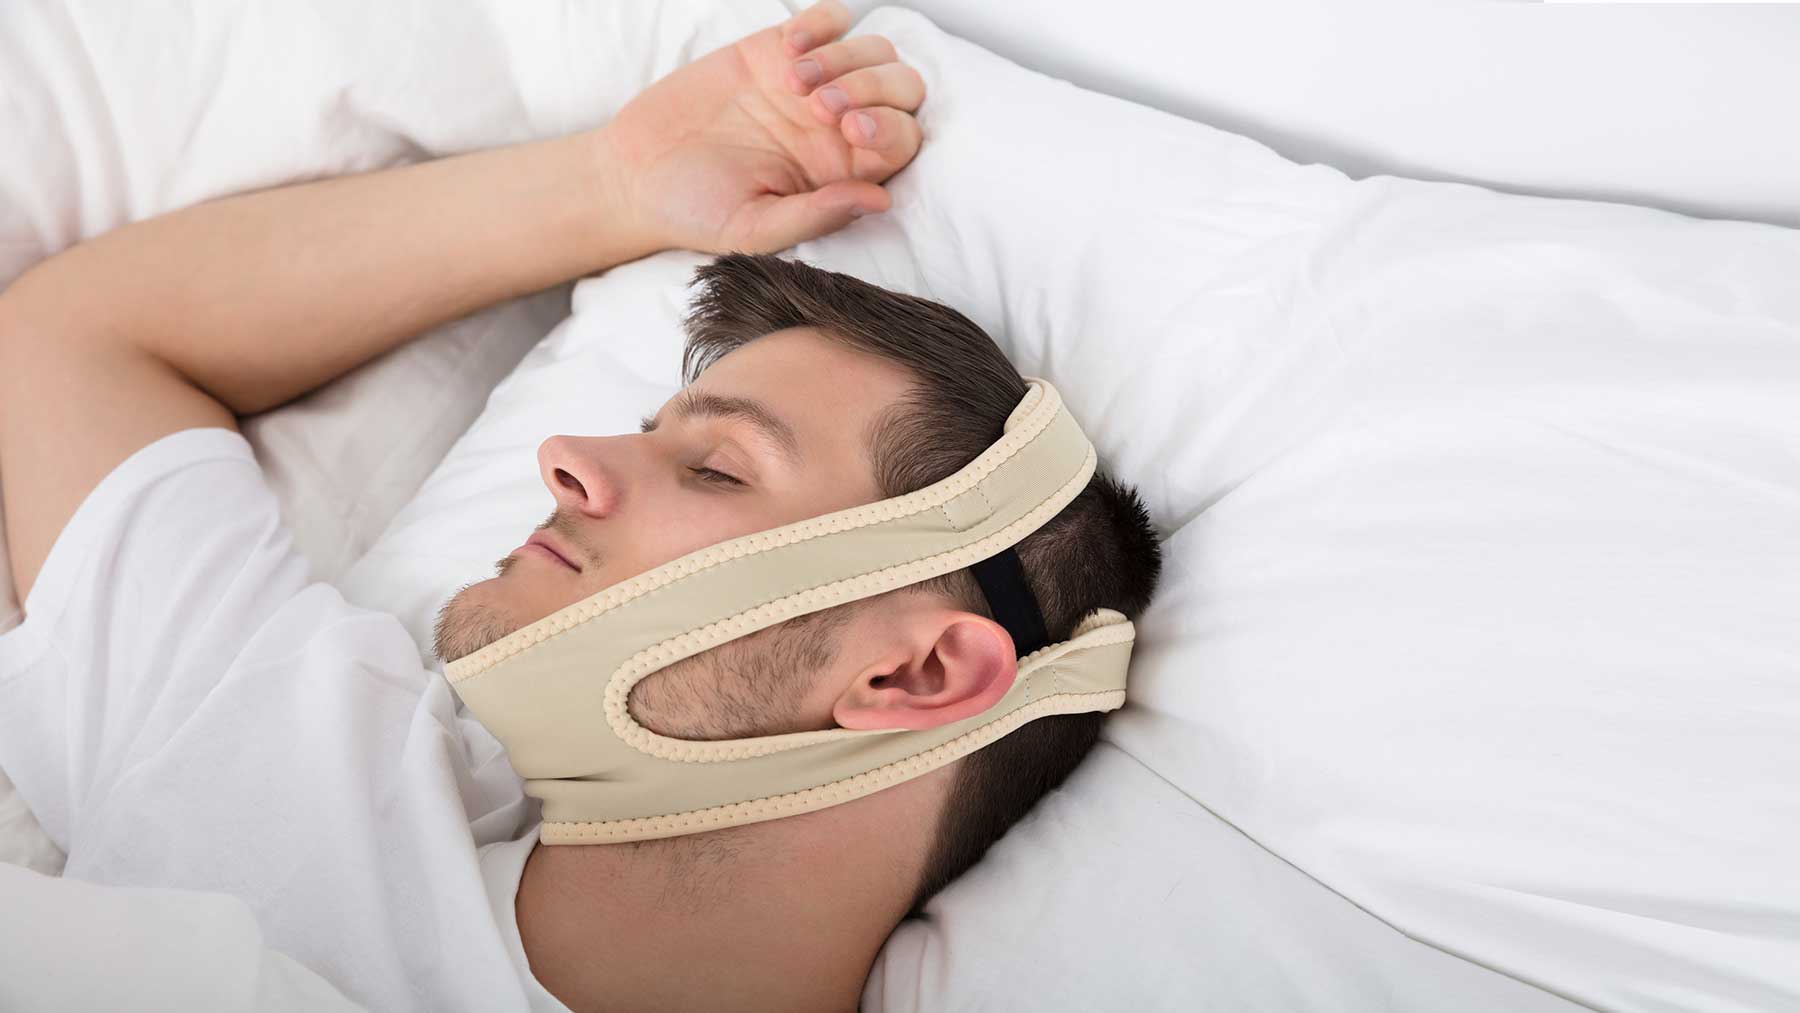 How to Stop Snoring While You Sleep